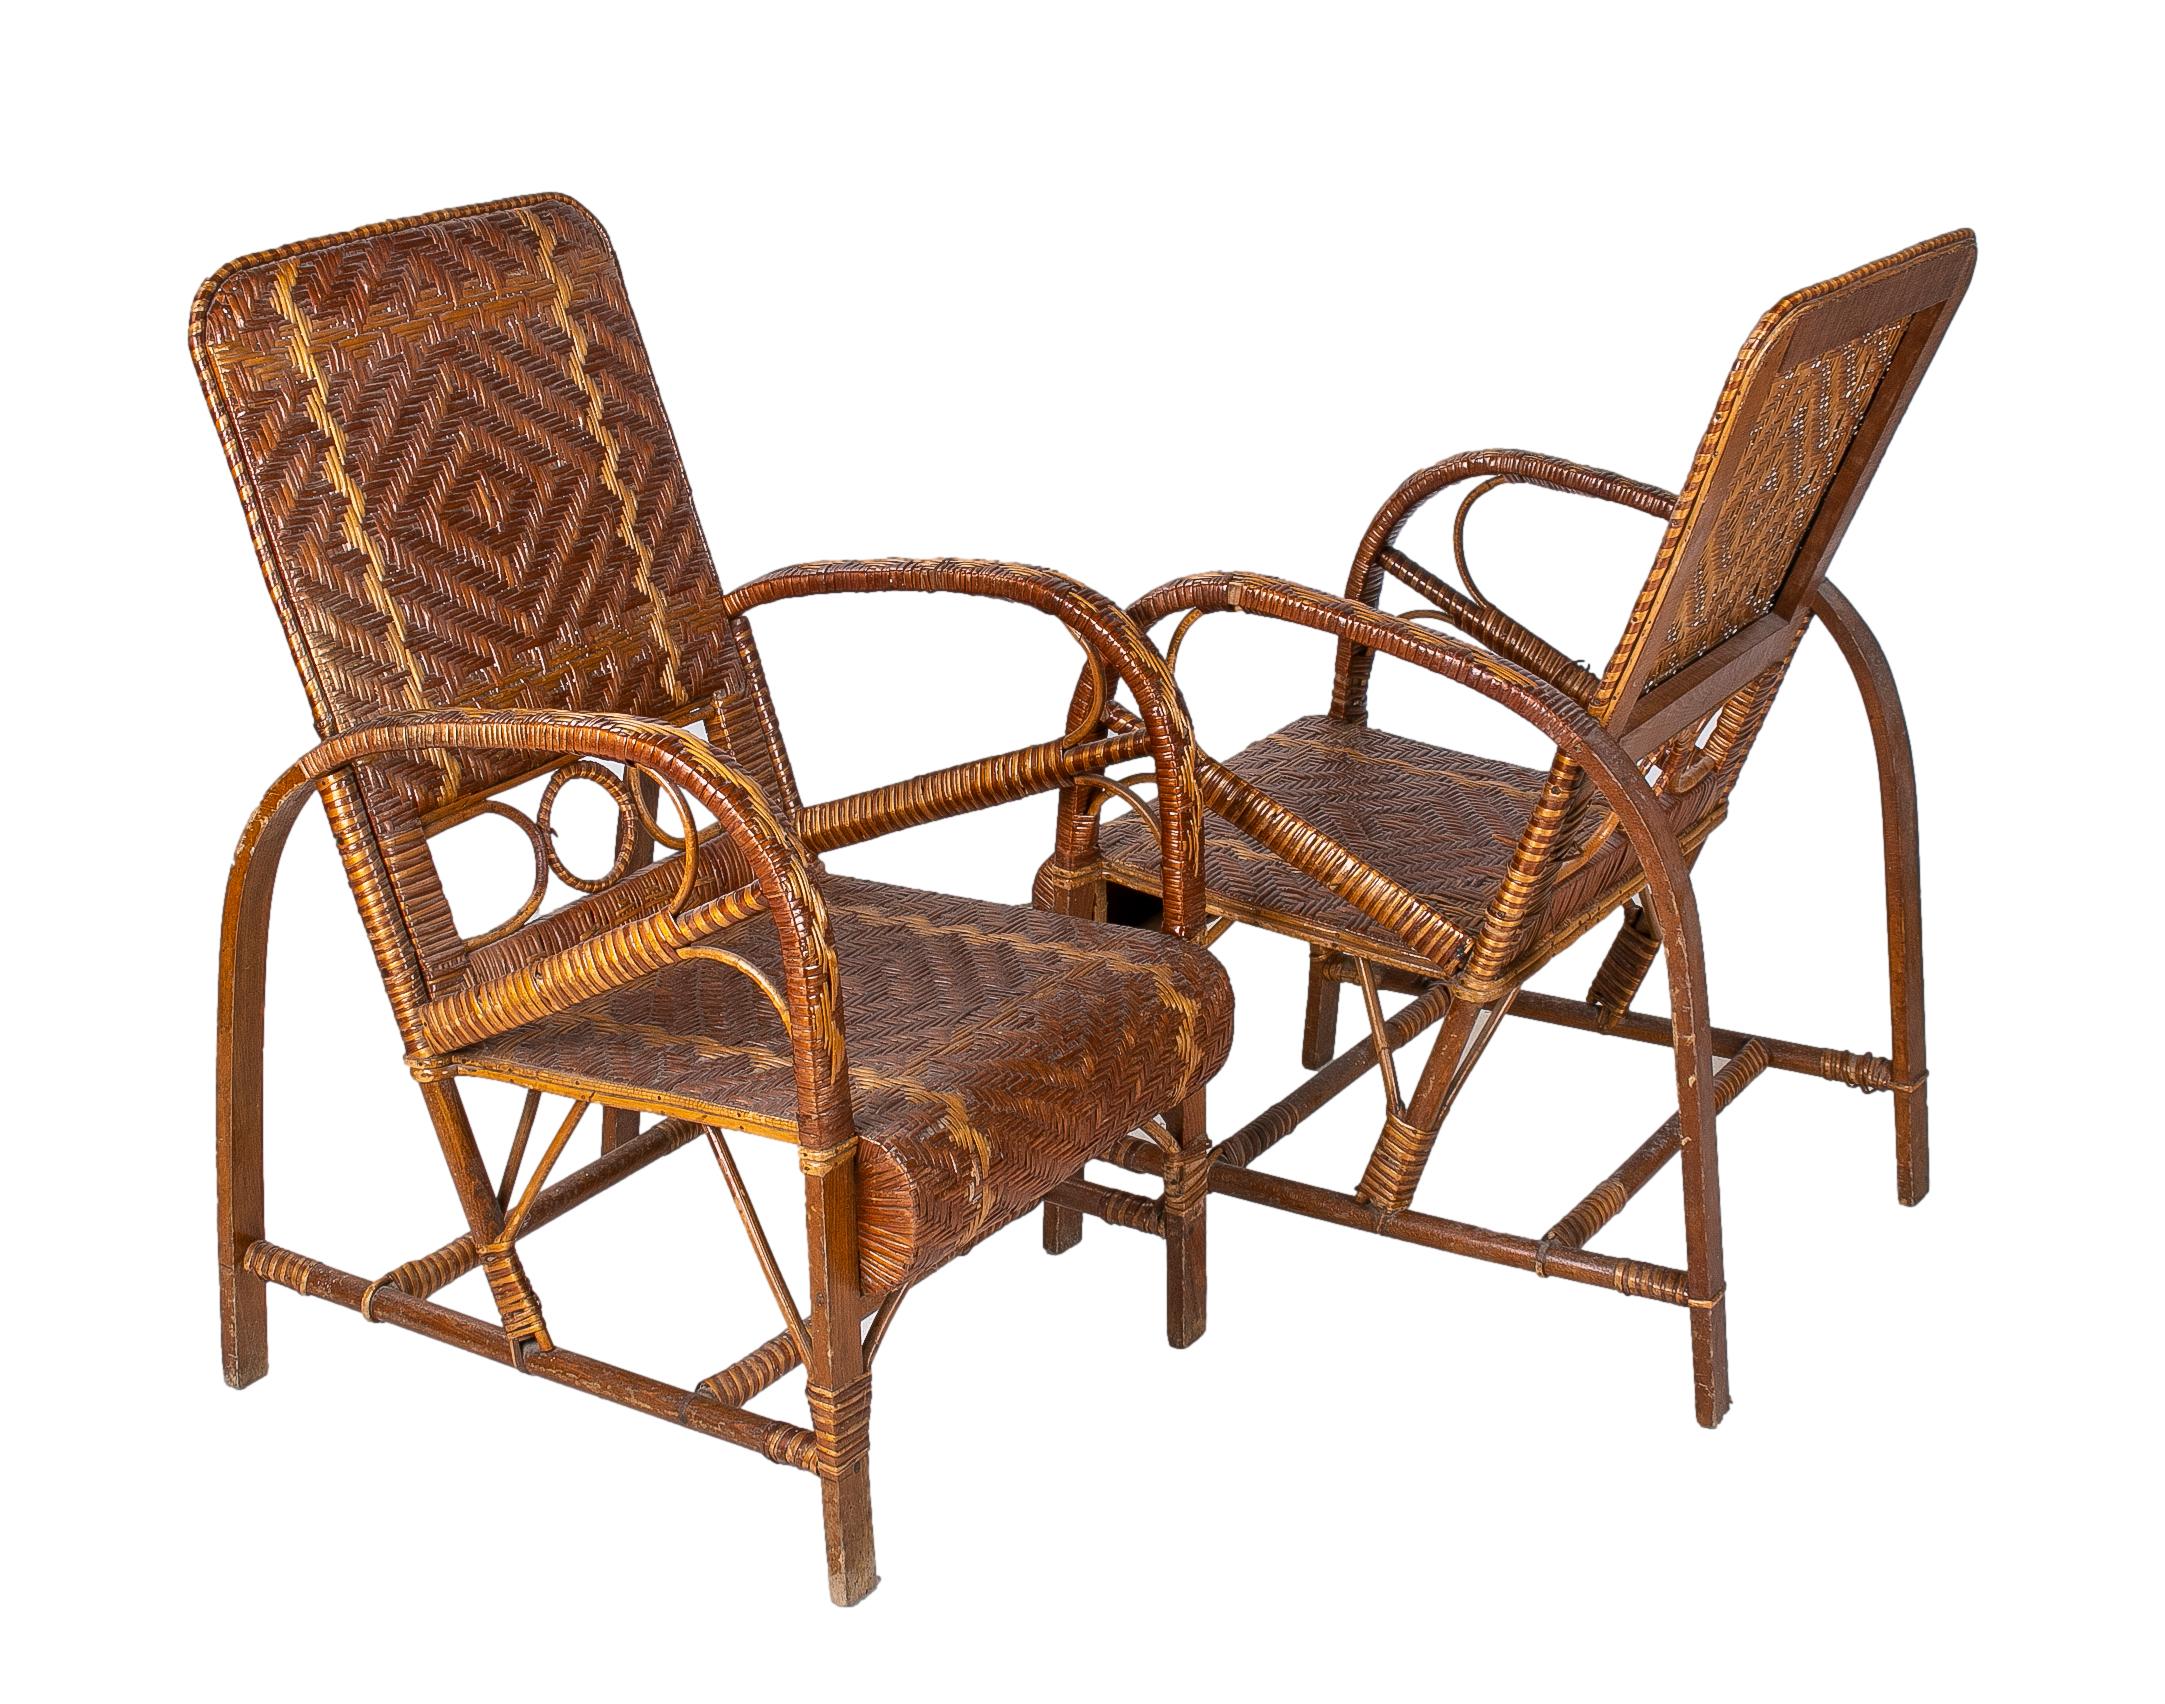 Pair of 1950s vintage Spanish hand woven lace wicker and bamboo armchairs.